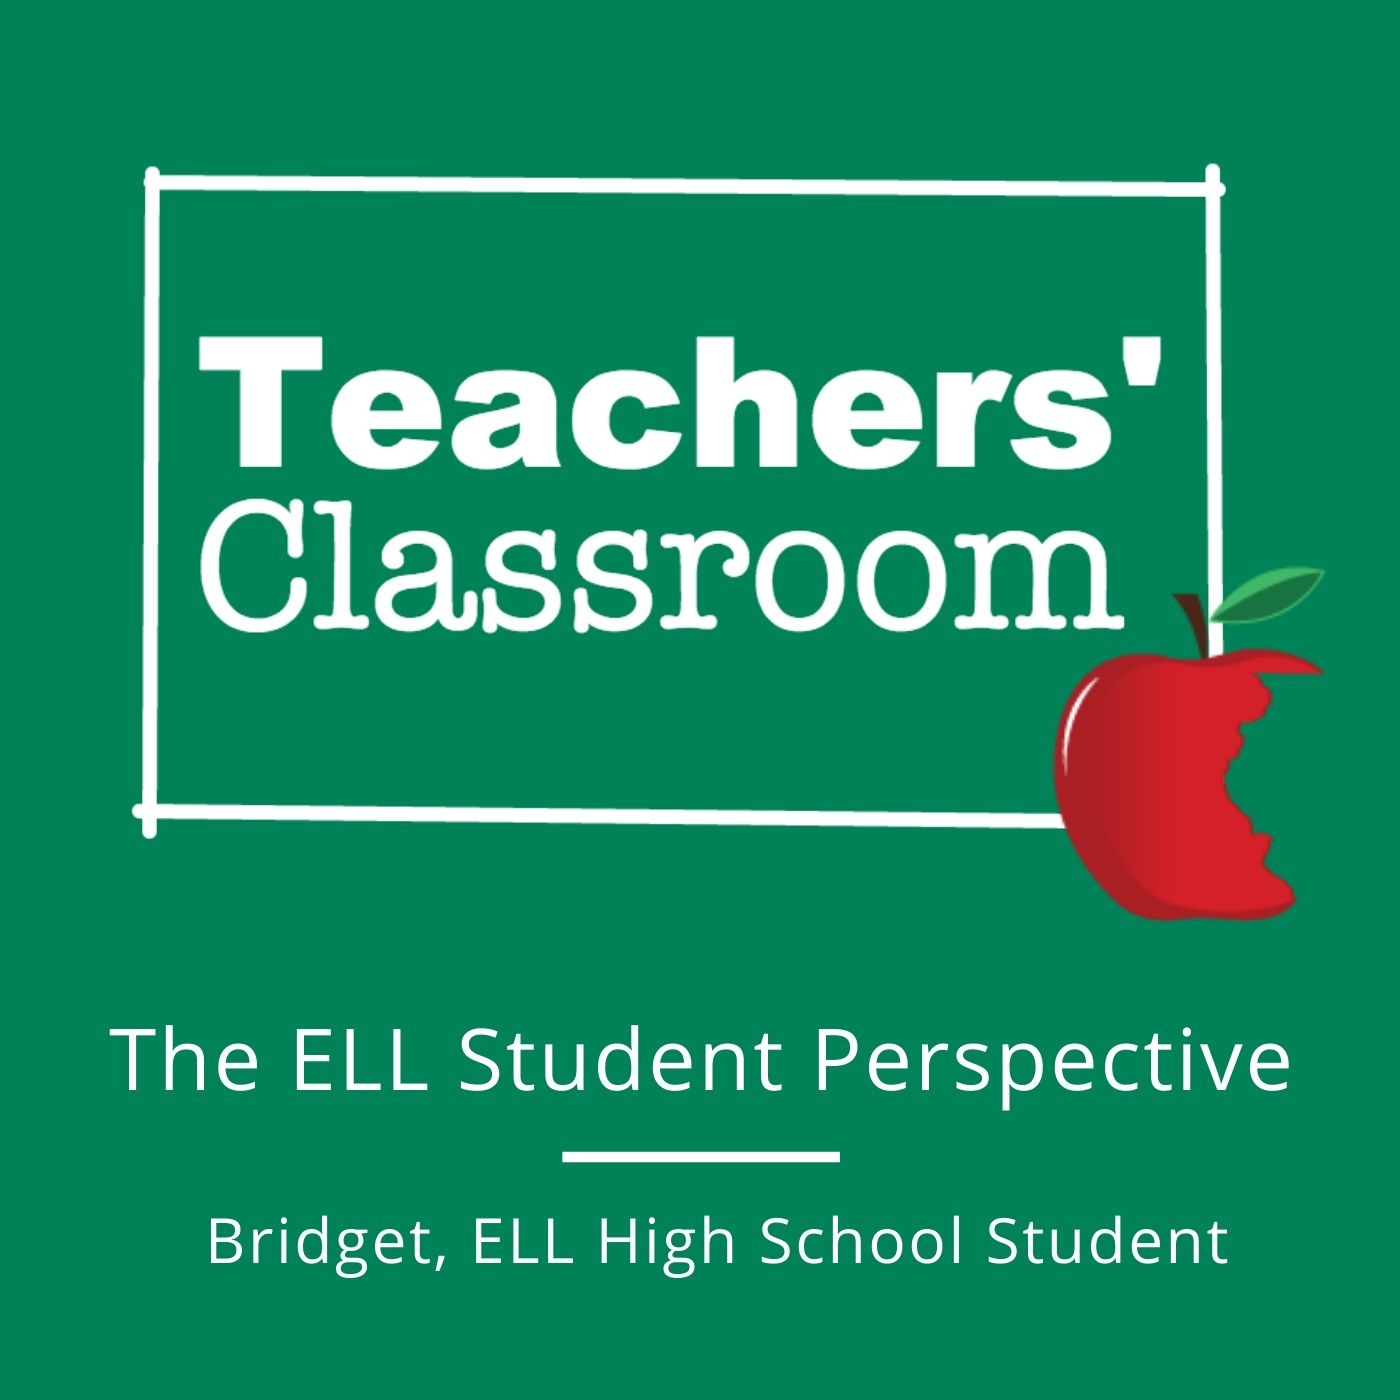 The ELL Student Experience with Bridget